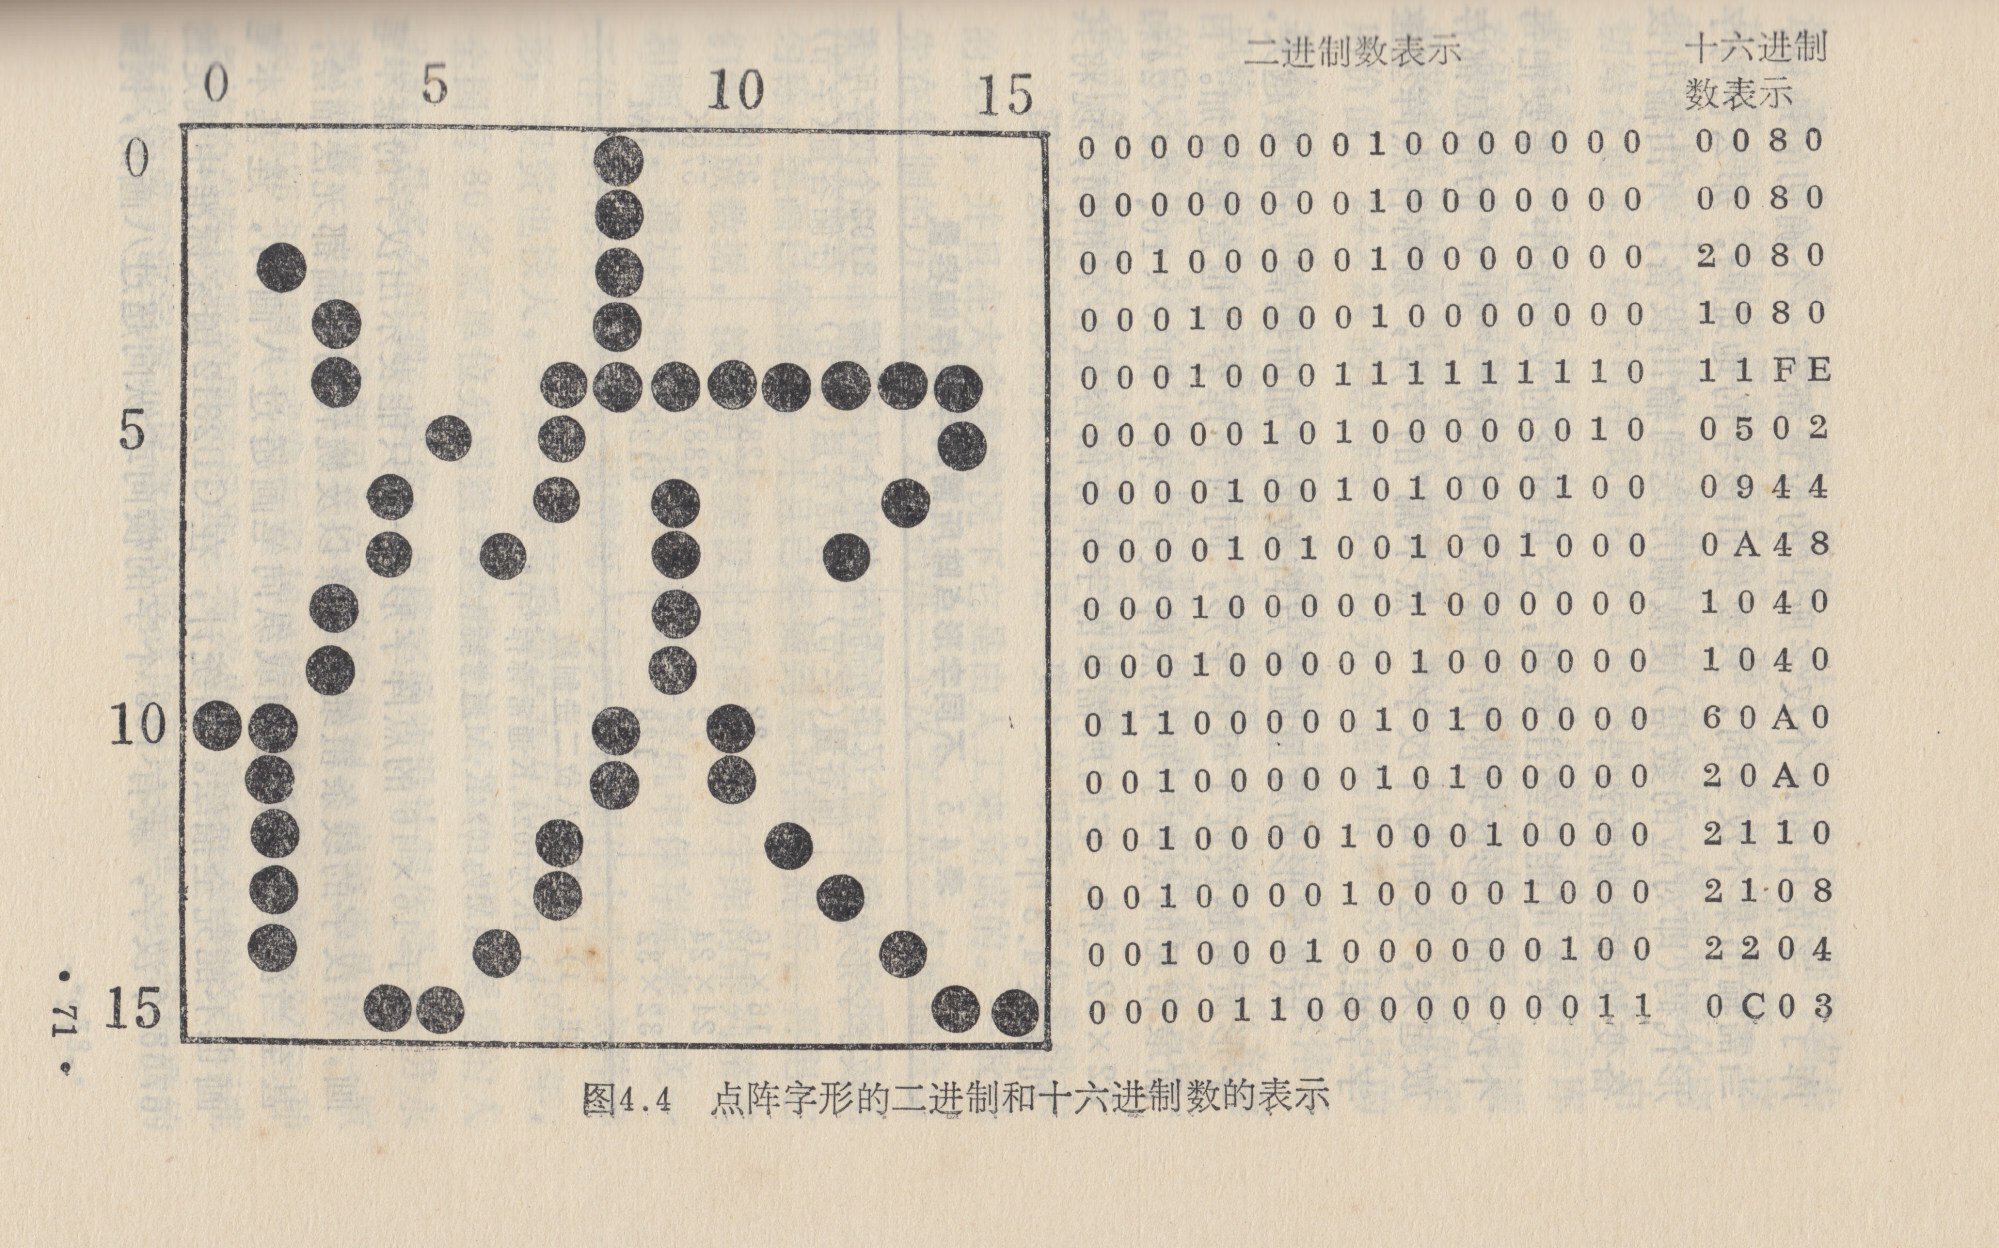 Chinese character bitmap and corresponding binary and hexadecimal values from the text “Chinese Character Information Processing”. Photo: Thomas S. Mullaney East Asian Information Technology History Collection (Stanford University)